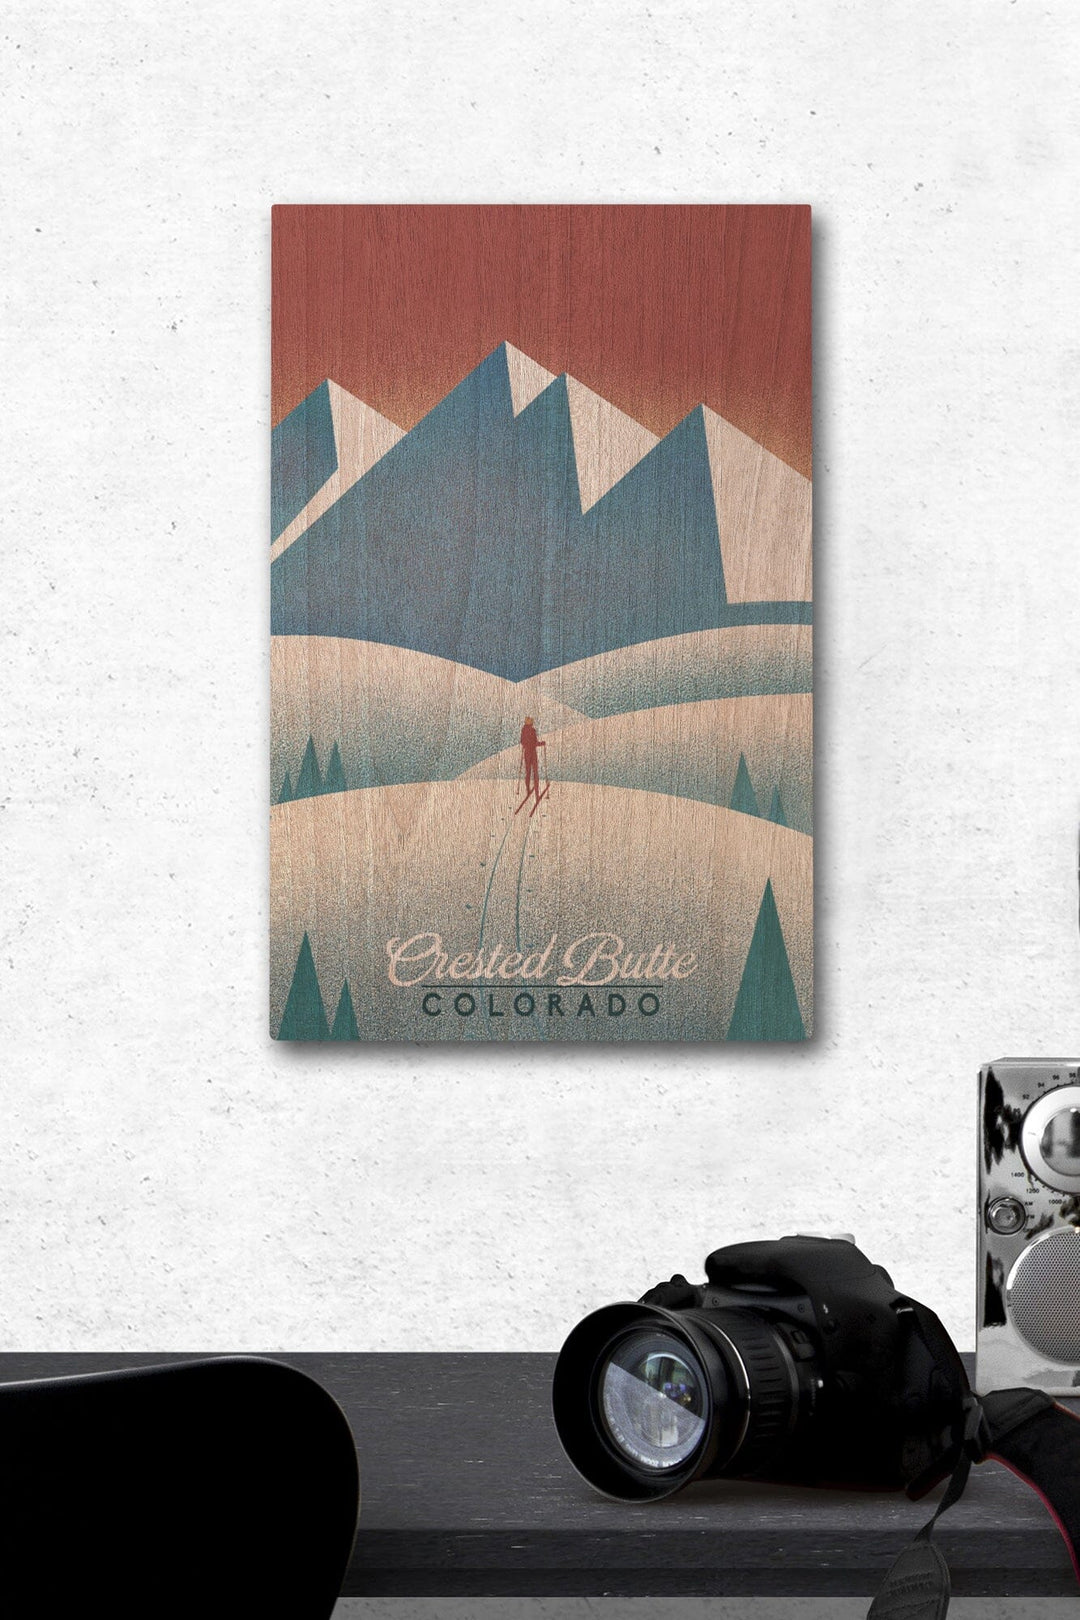 Crested Butte, Colorado, Skier In the Mountains, Litho, Lantern Press Artwork, Wood Signs and Postcards Wood Lantern Press 12 x 18 Wood Gallery Print 